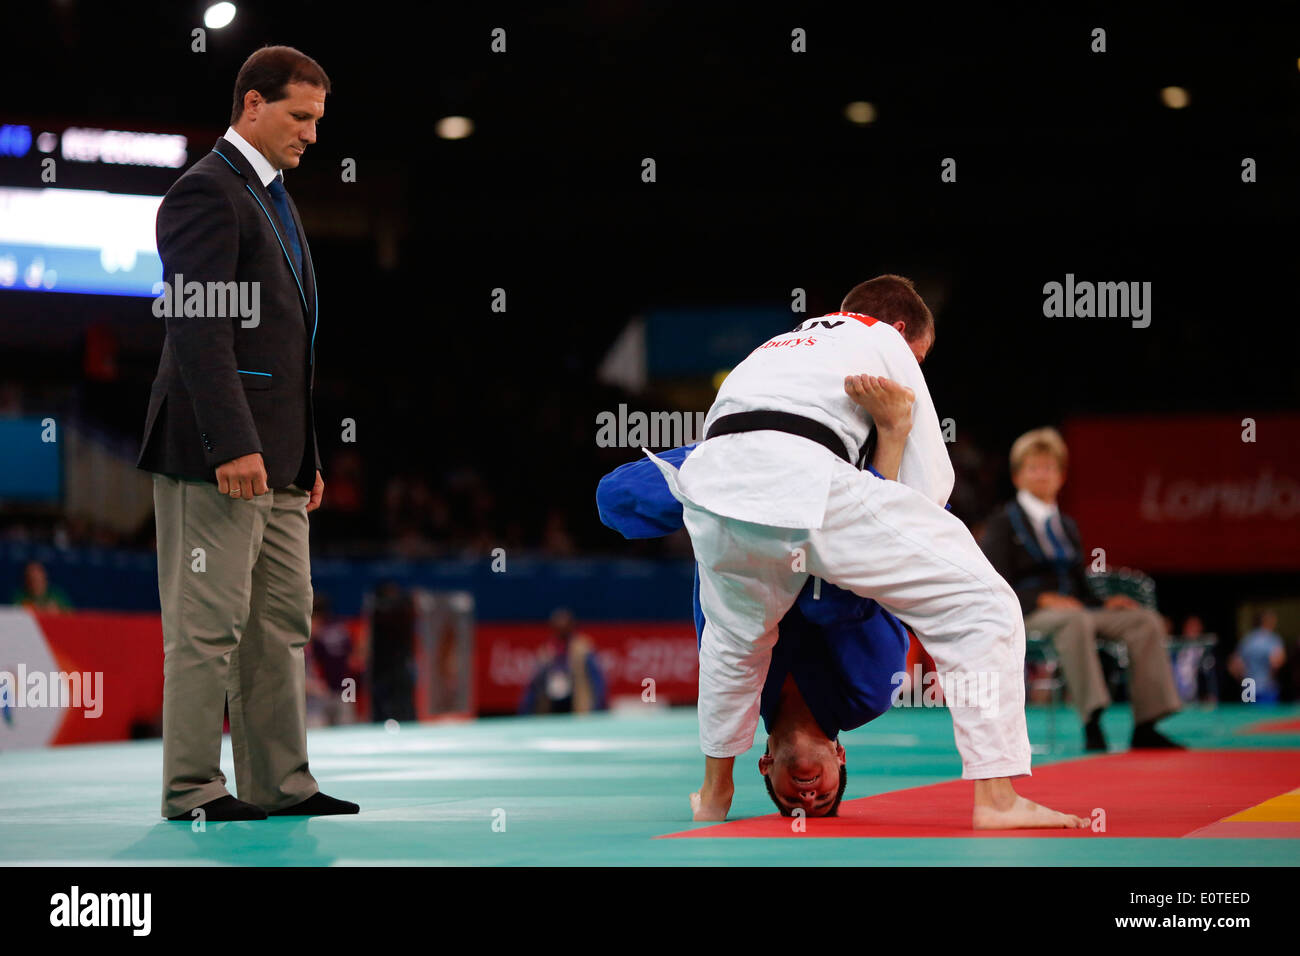 Justin Karn of Canada (white) fights against Juan Castellanos Of Colombia (blue) during the men's repechage 60kg London 2012 Paralympic Games Judo competition in London, Britain, 30 August 2012. Stock Photo